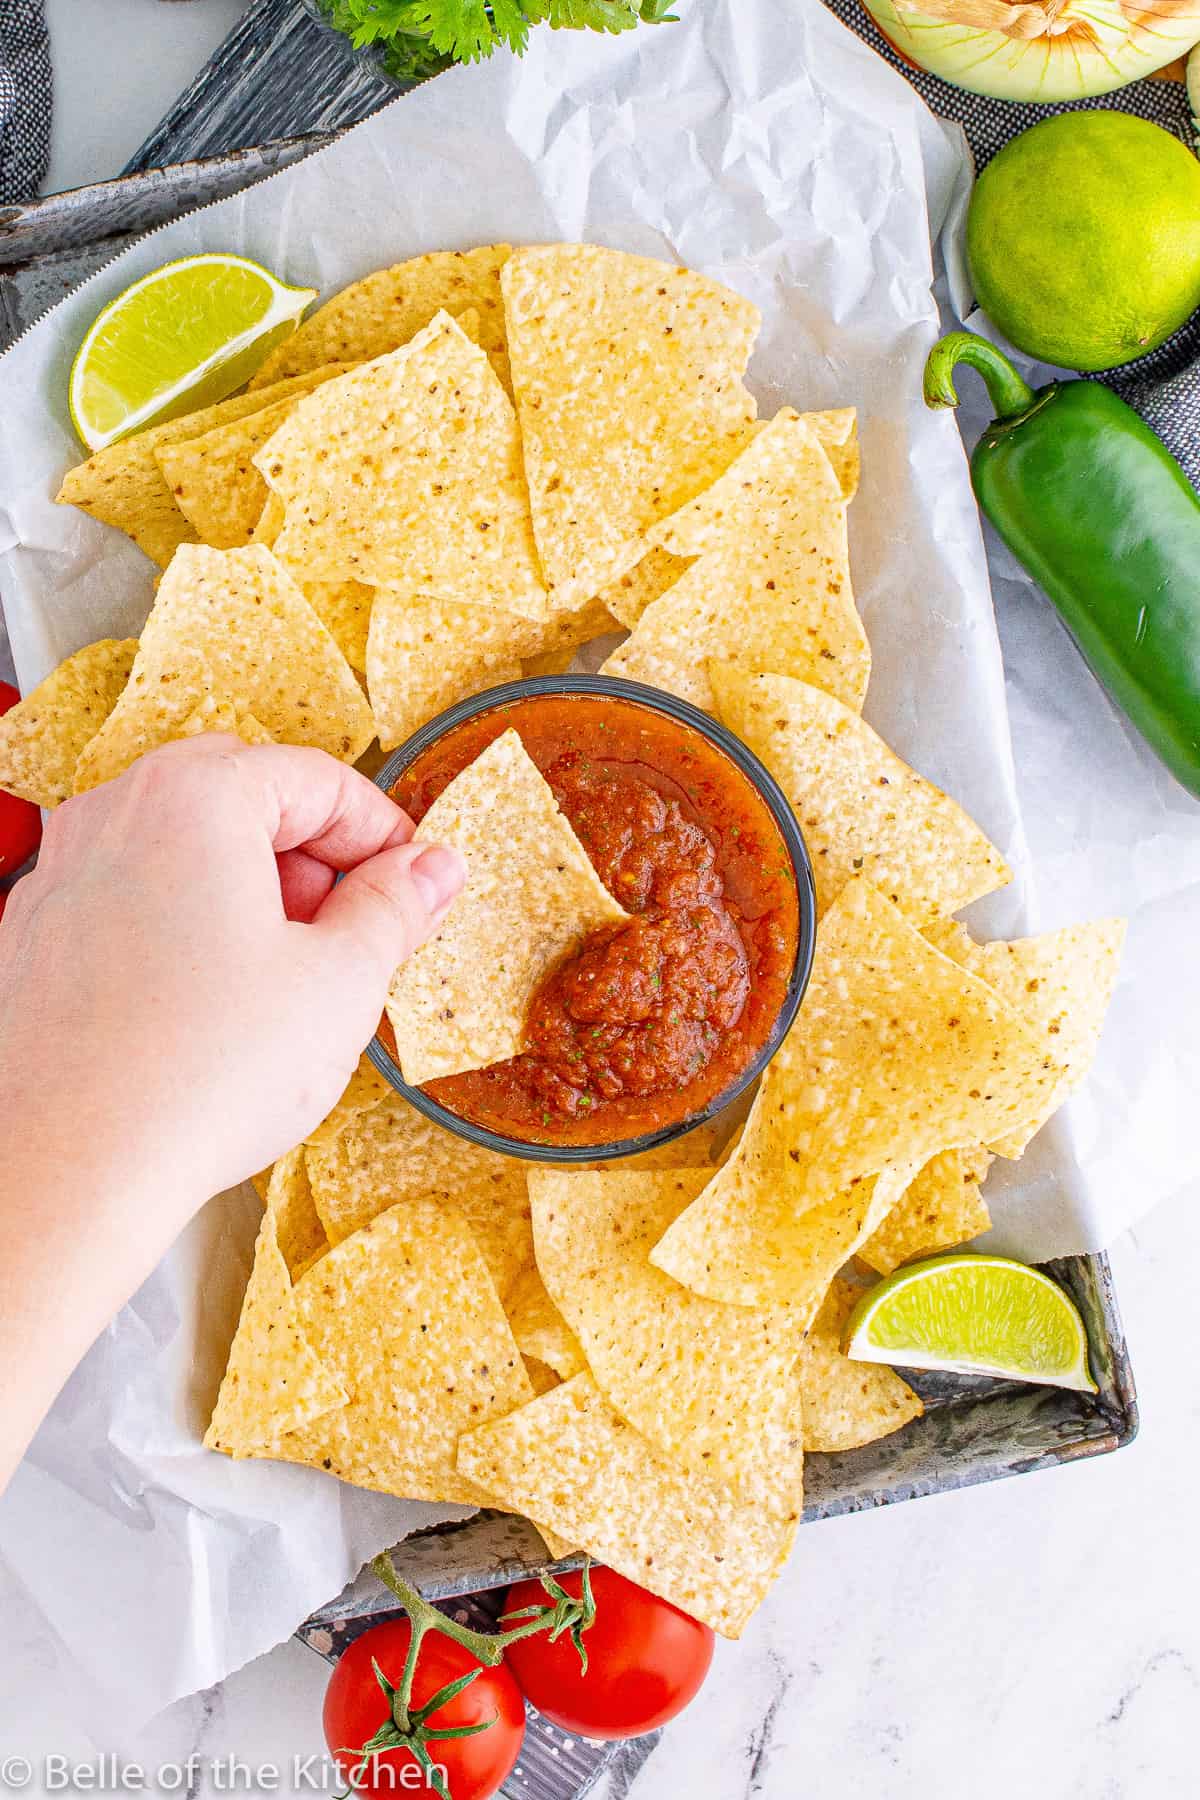 Mexican salsa recipe in a bowl surrounded by tortilla chips